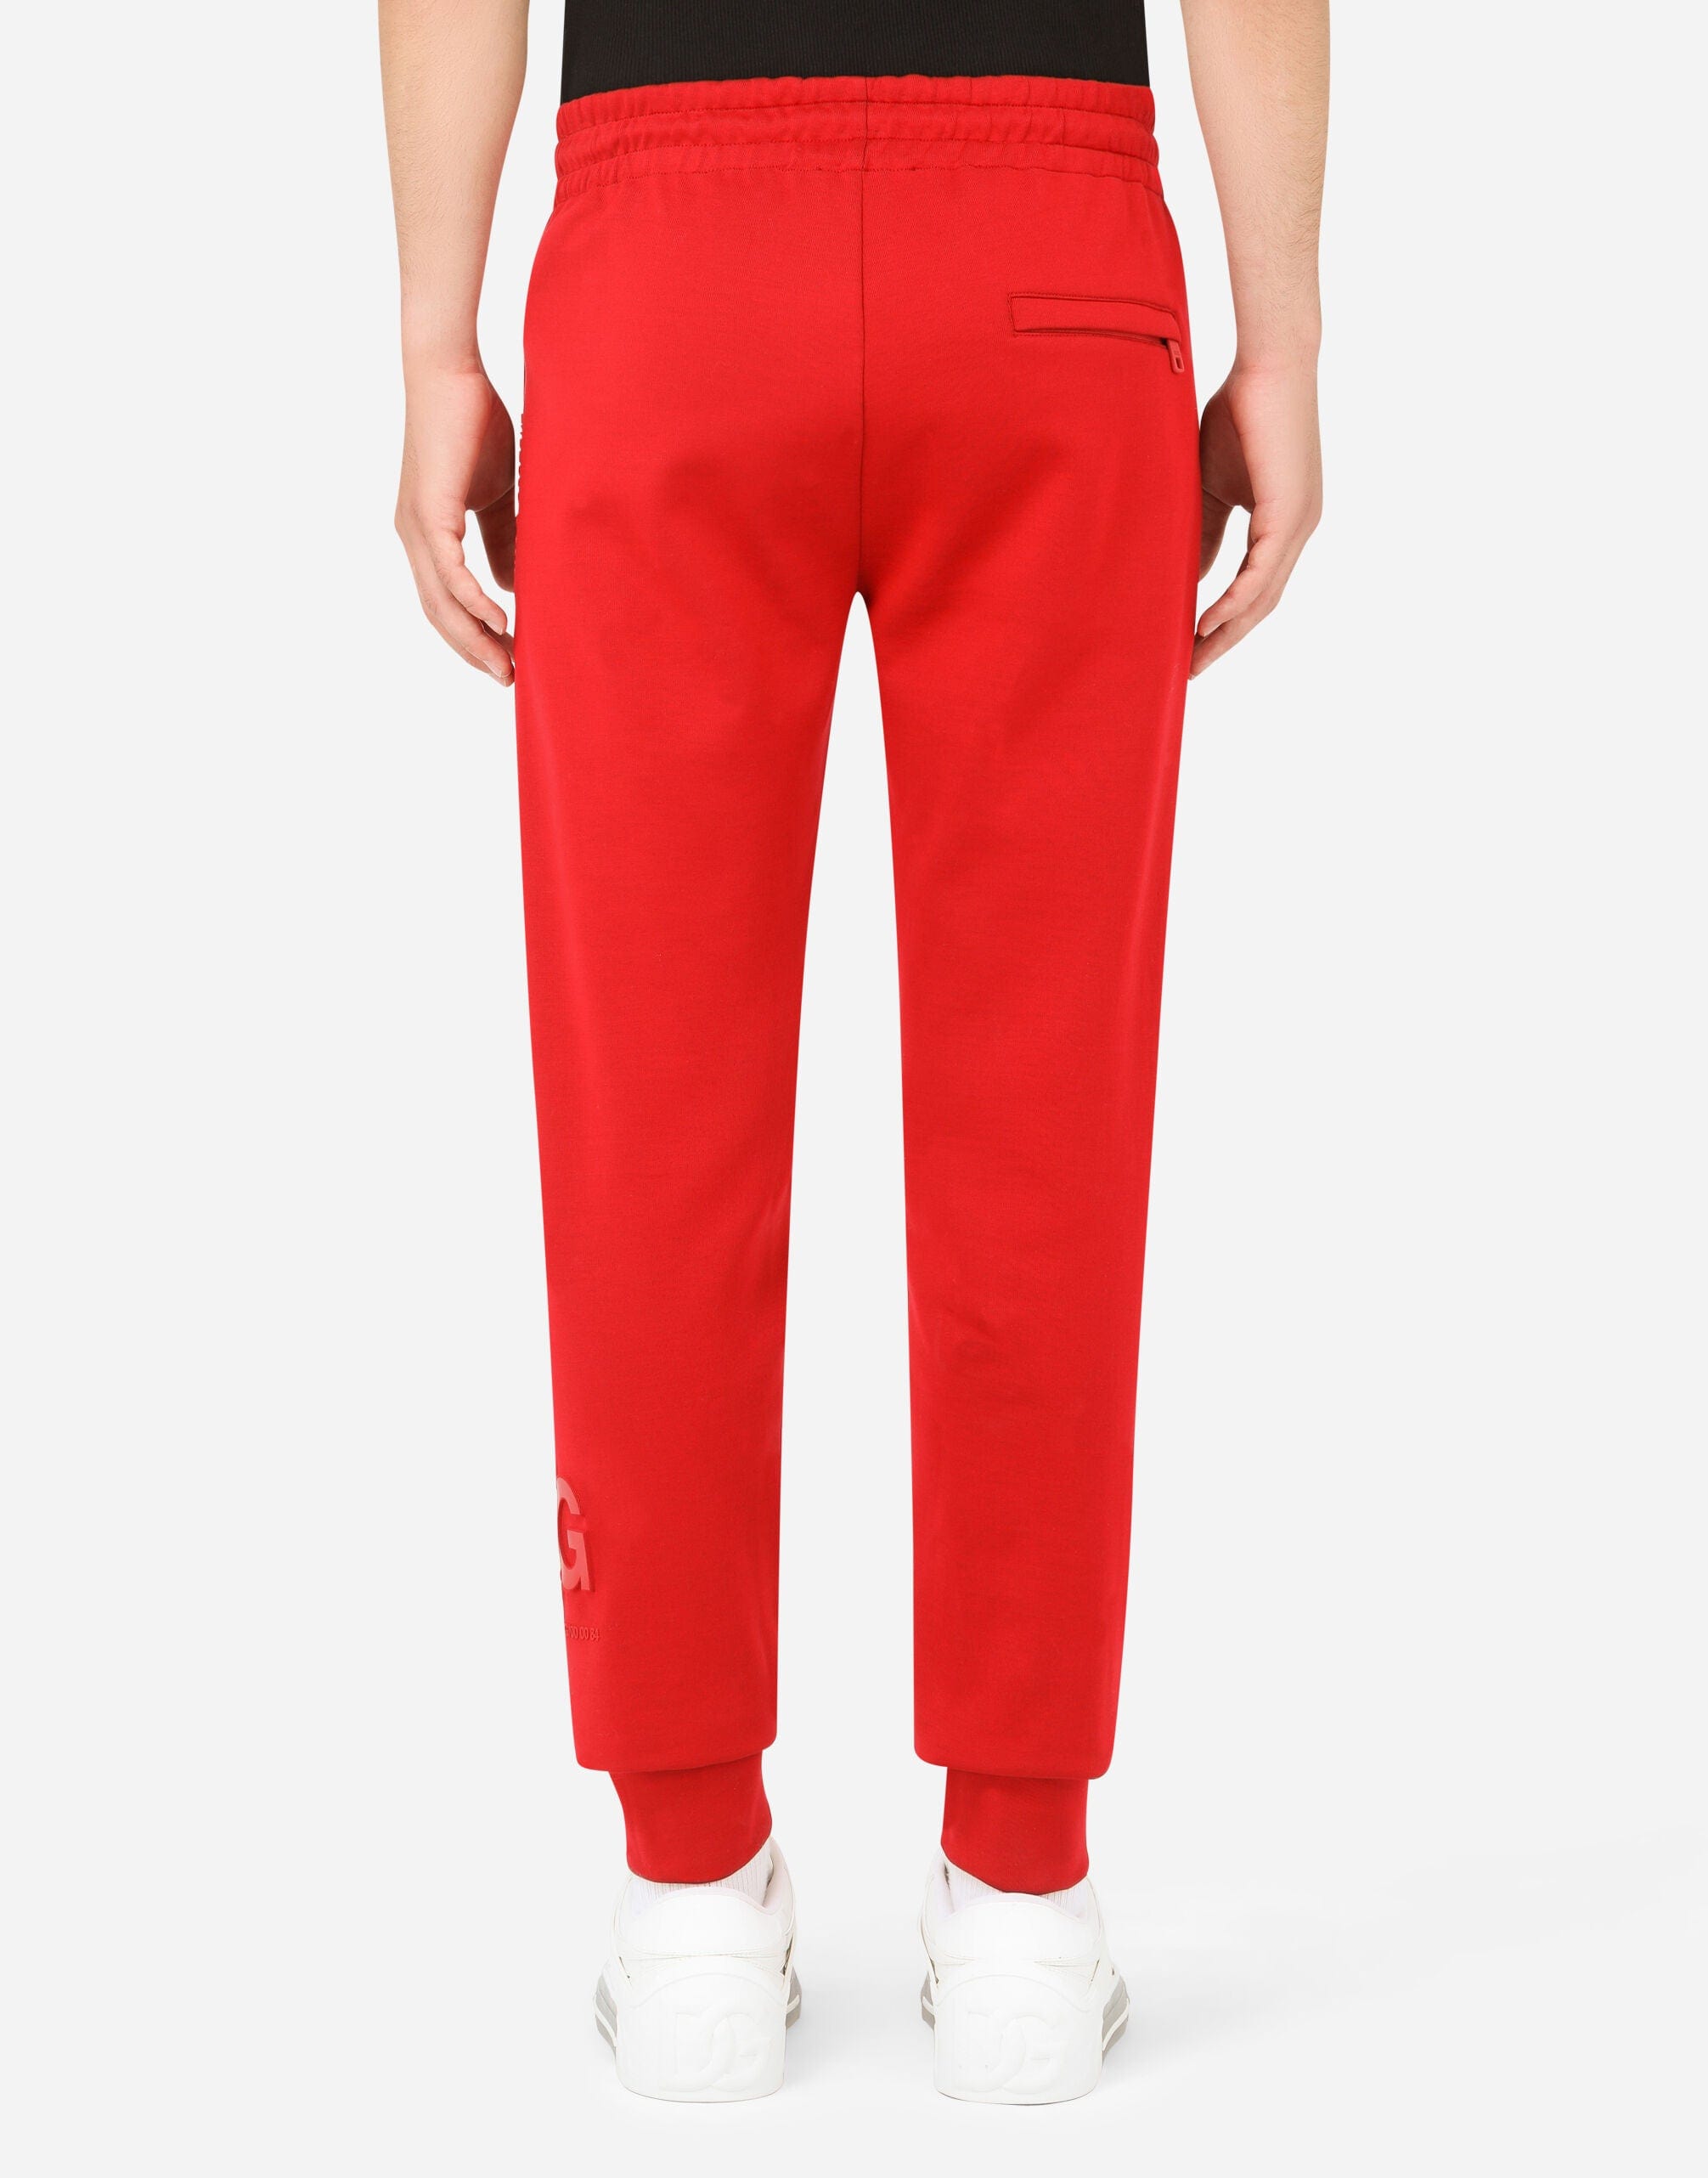 Dolce & Gabbana Jersey Jogging Pants With DG Patch